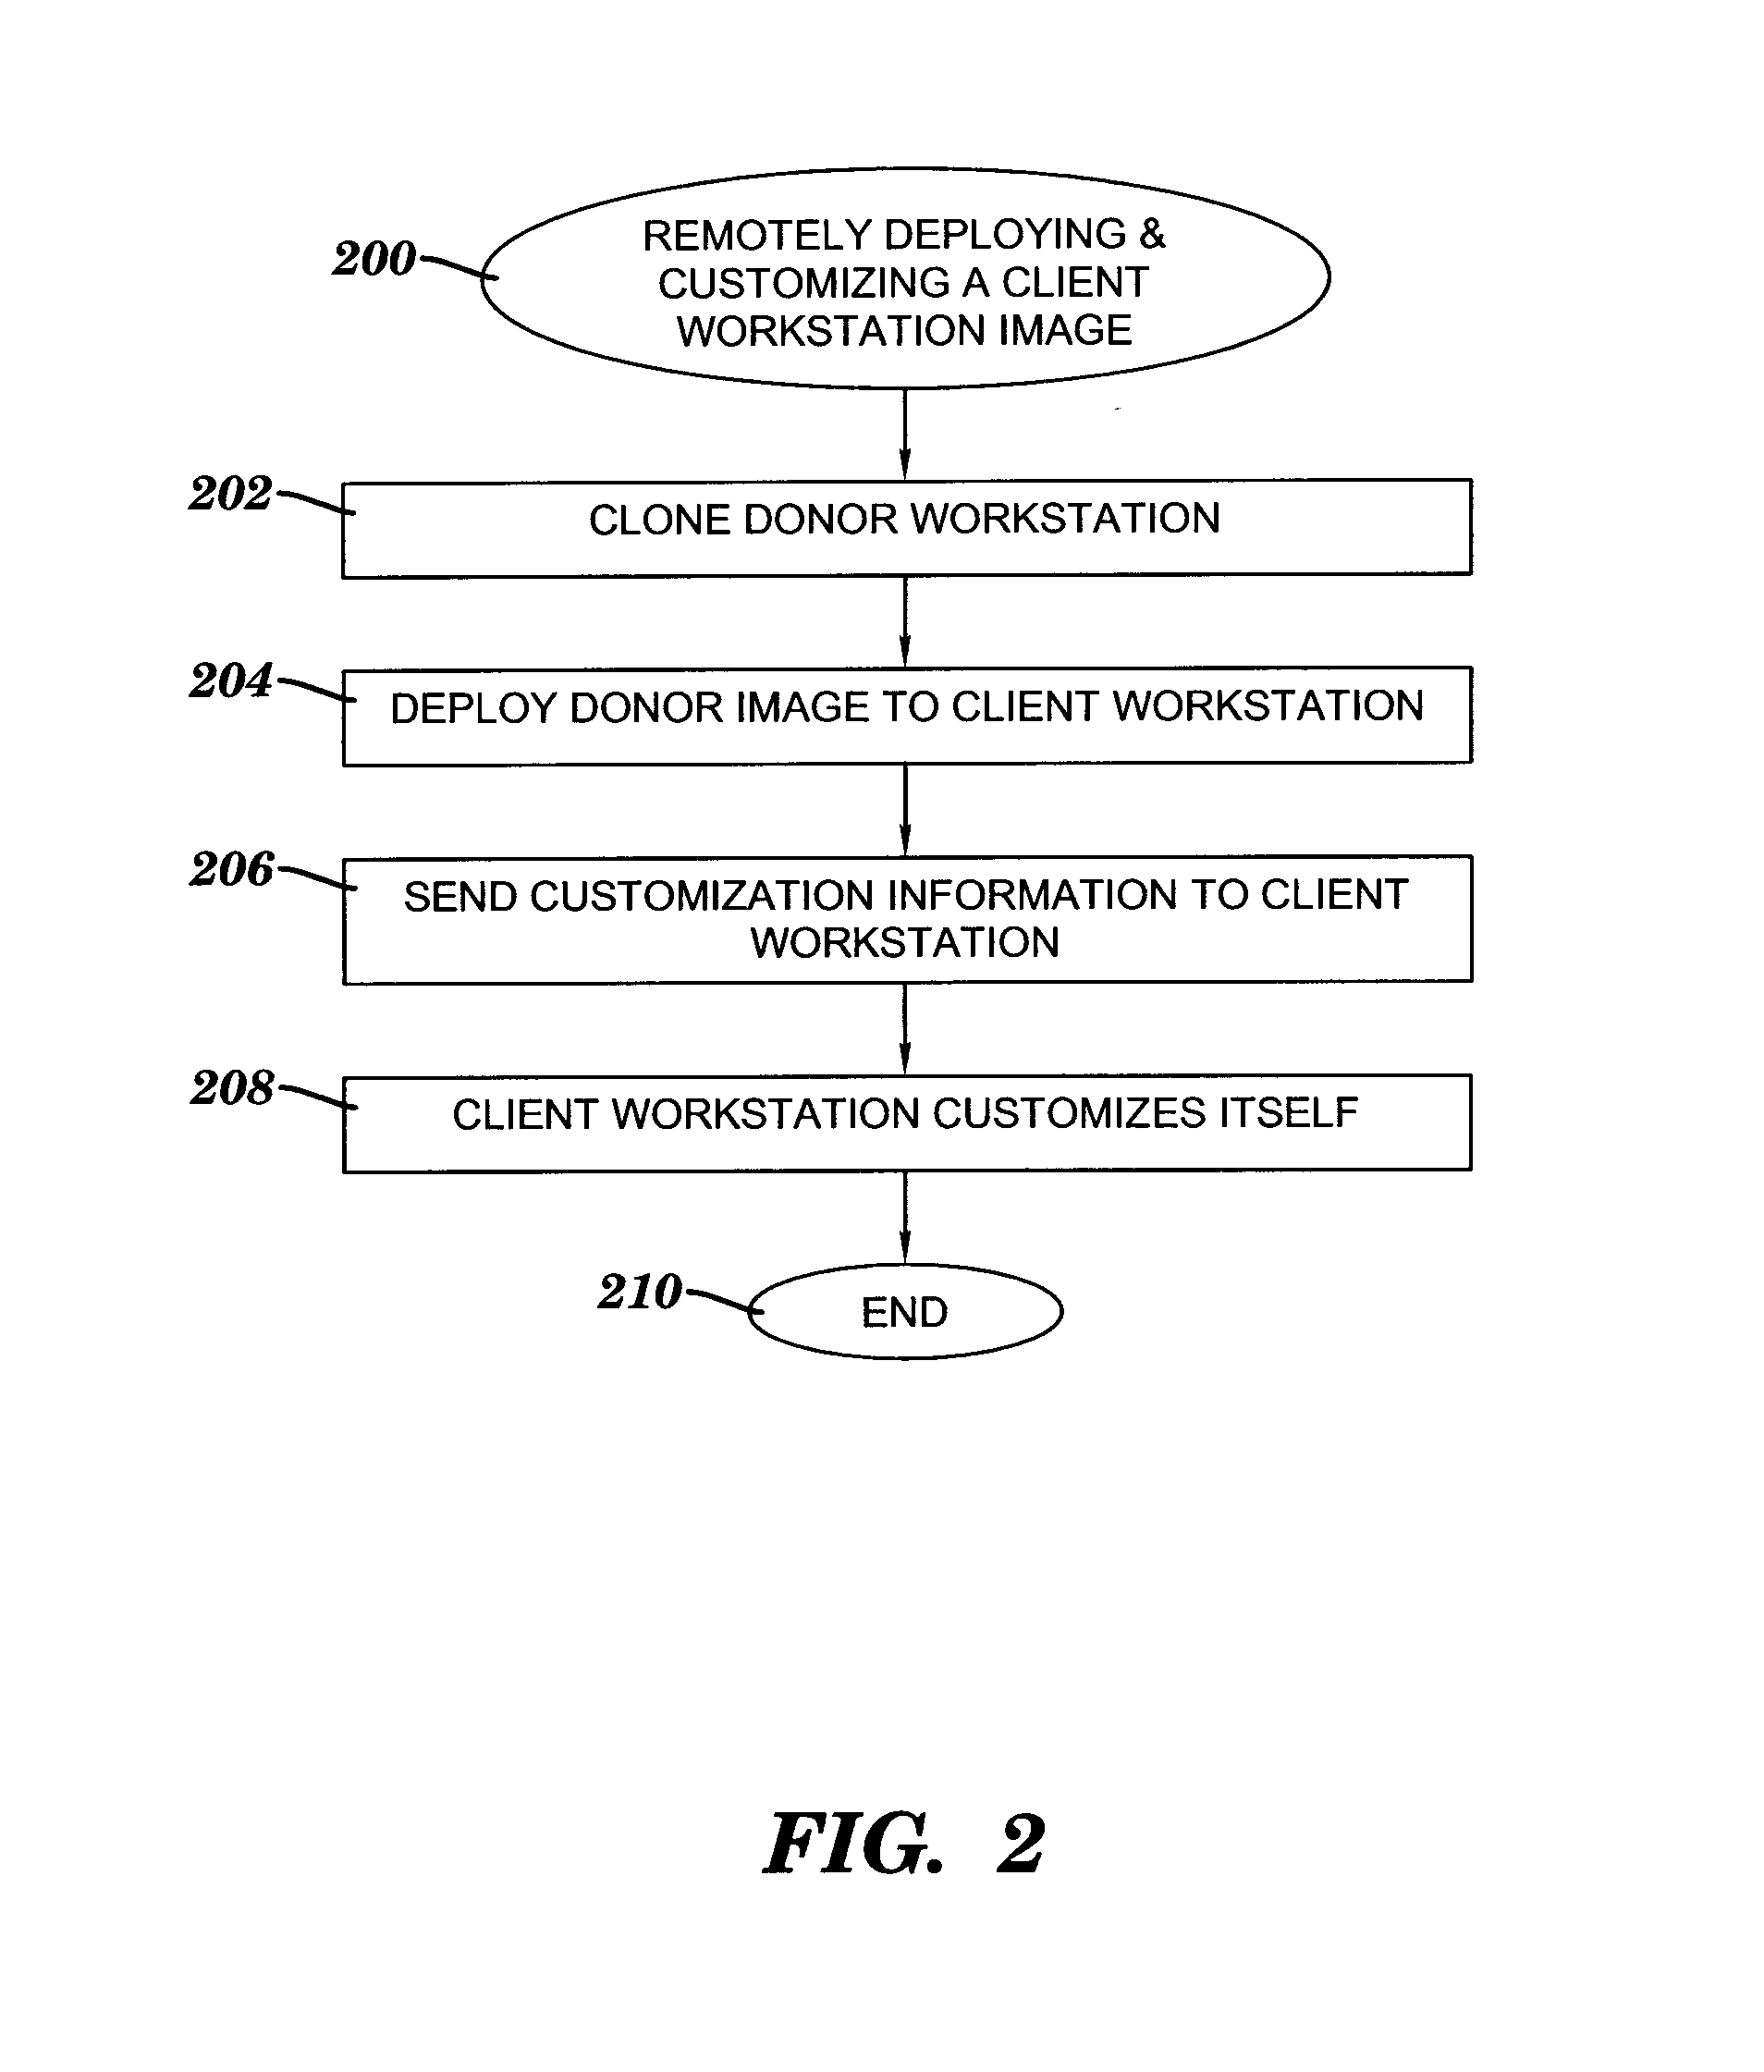 Method, system and program product for remotely deploying and automatically customizing workstation images